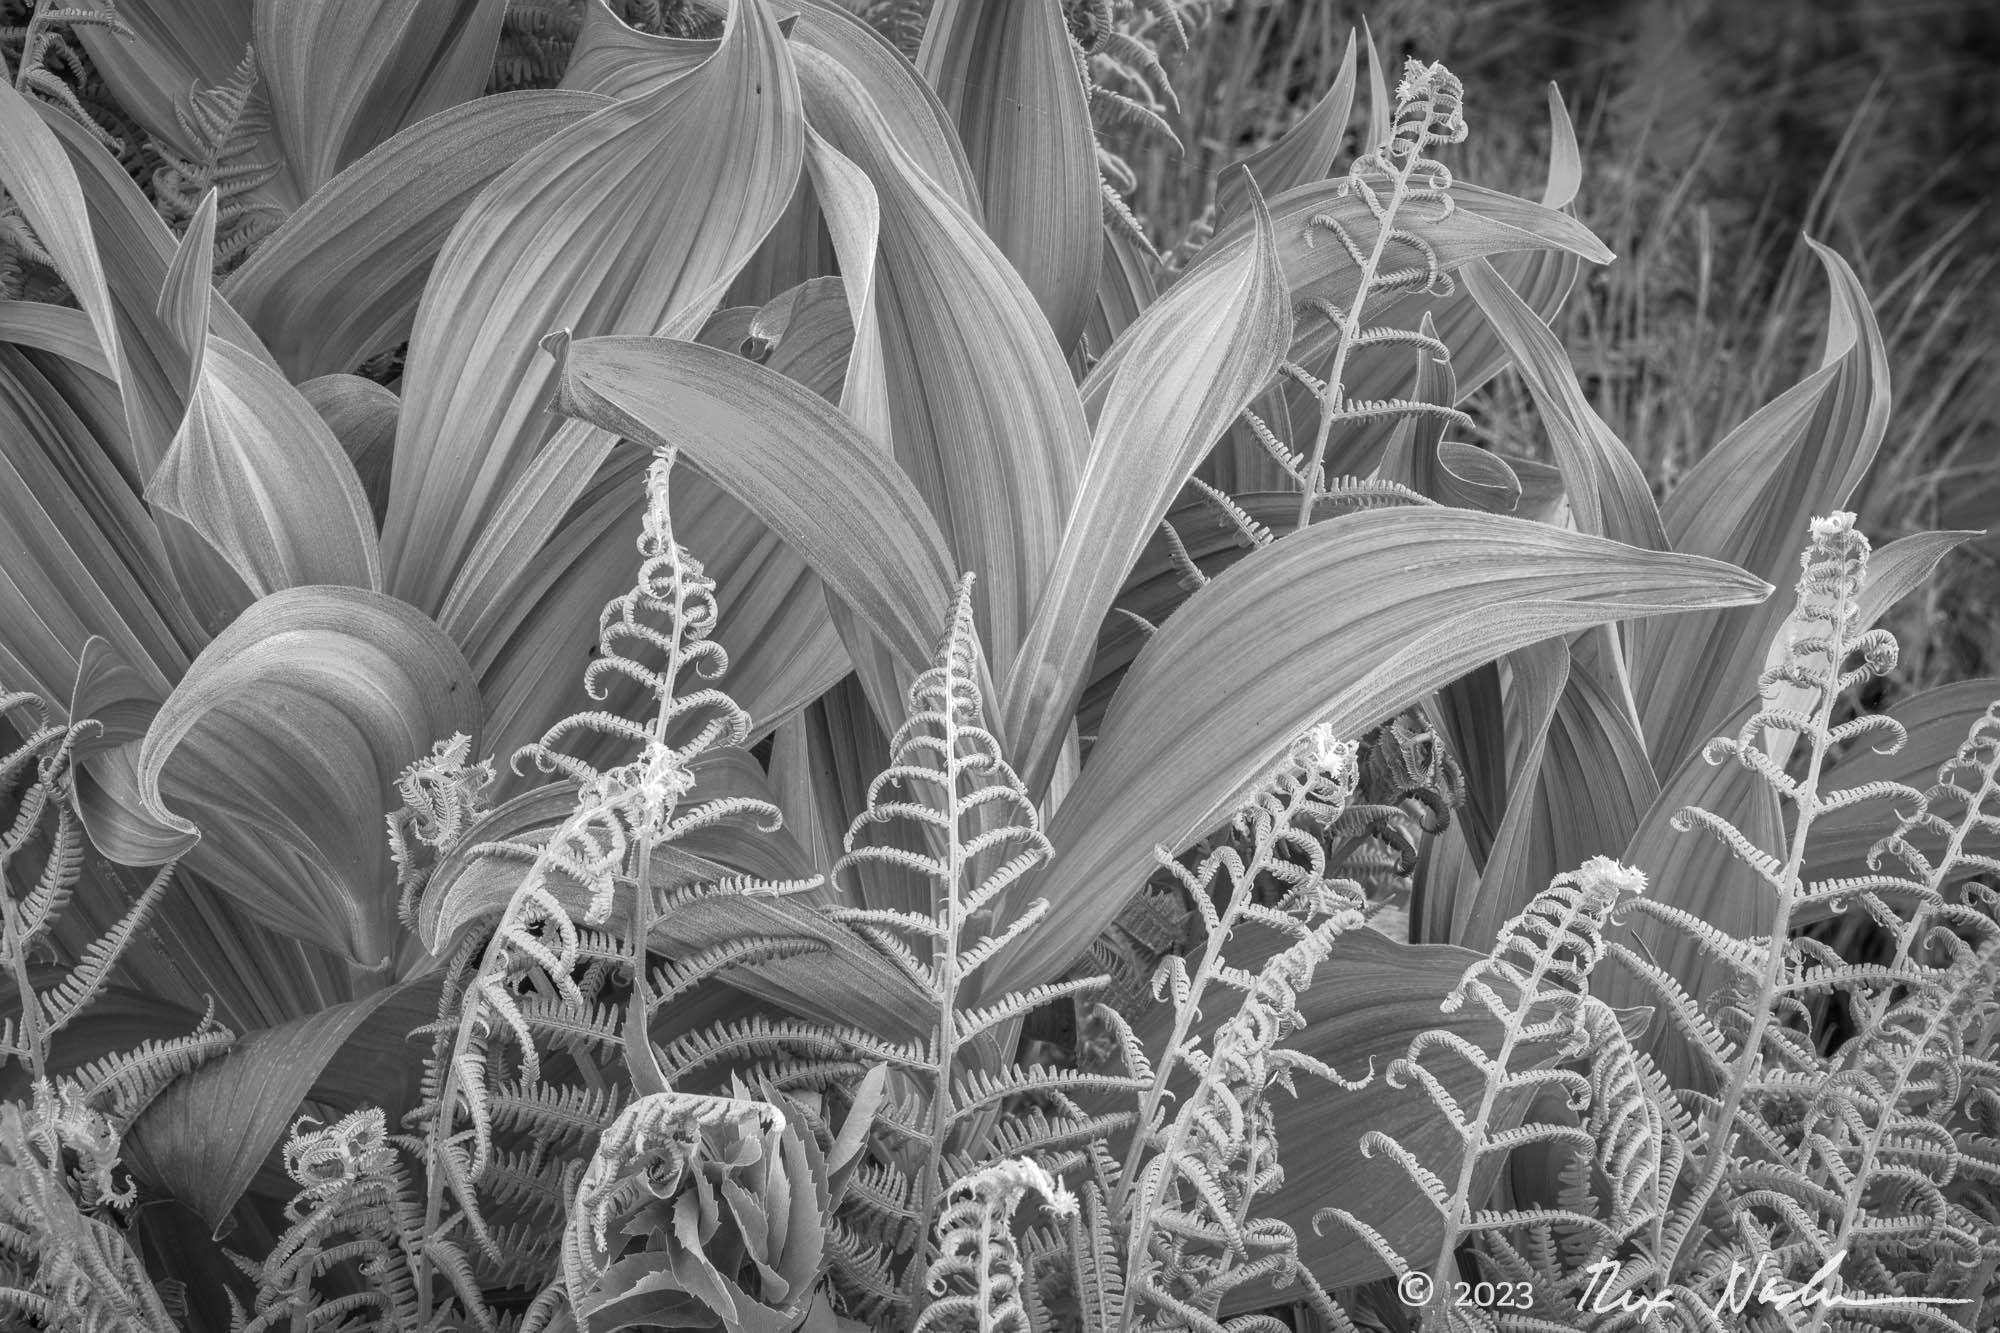 Fern Study #2 - Marble Mountains